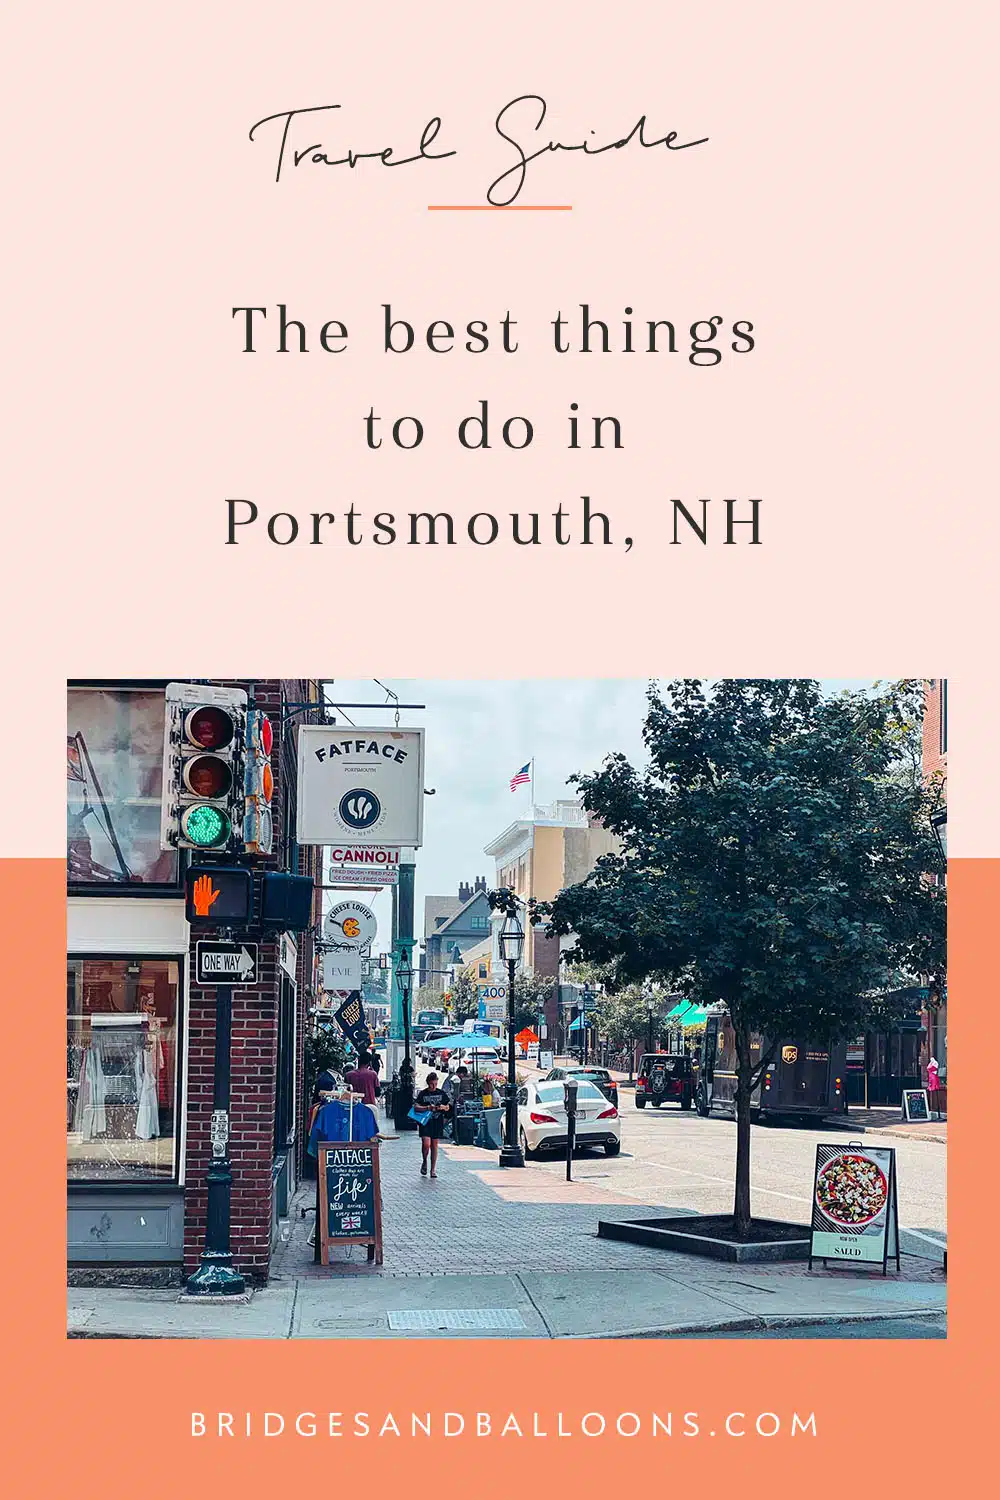 Pinterest pin showing a street in Portsmouth, NH.